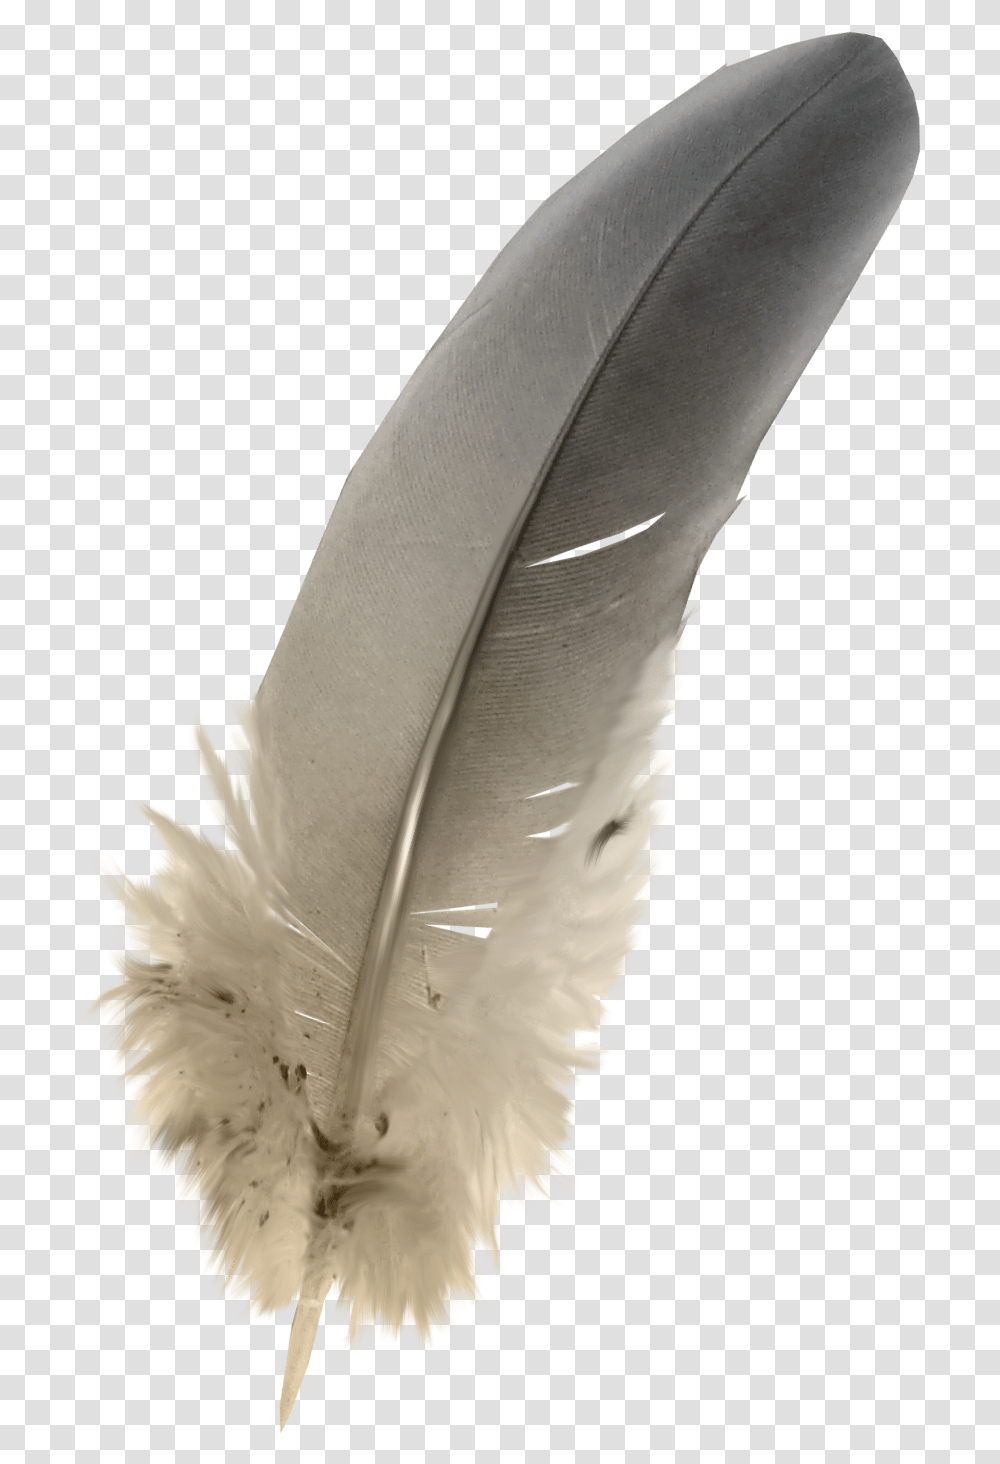 Feathers Download Owl Feather, Bottle, Bird, Animal, Pen Transparent Png